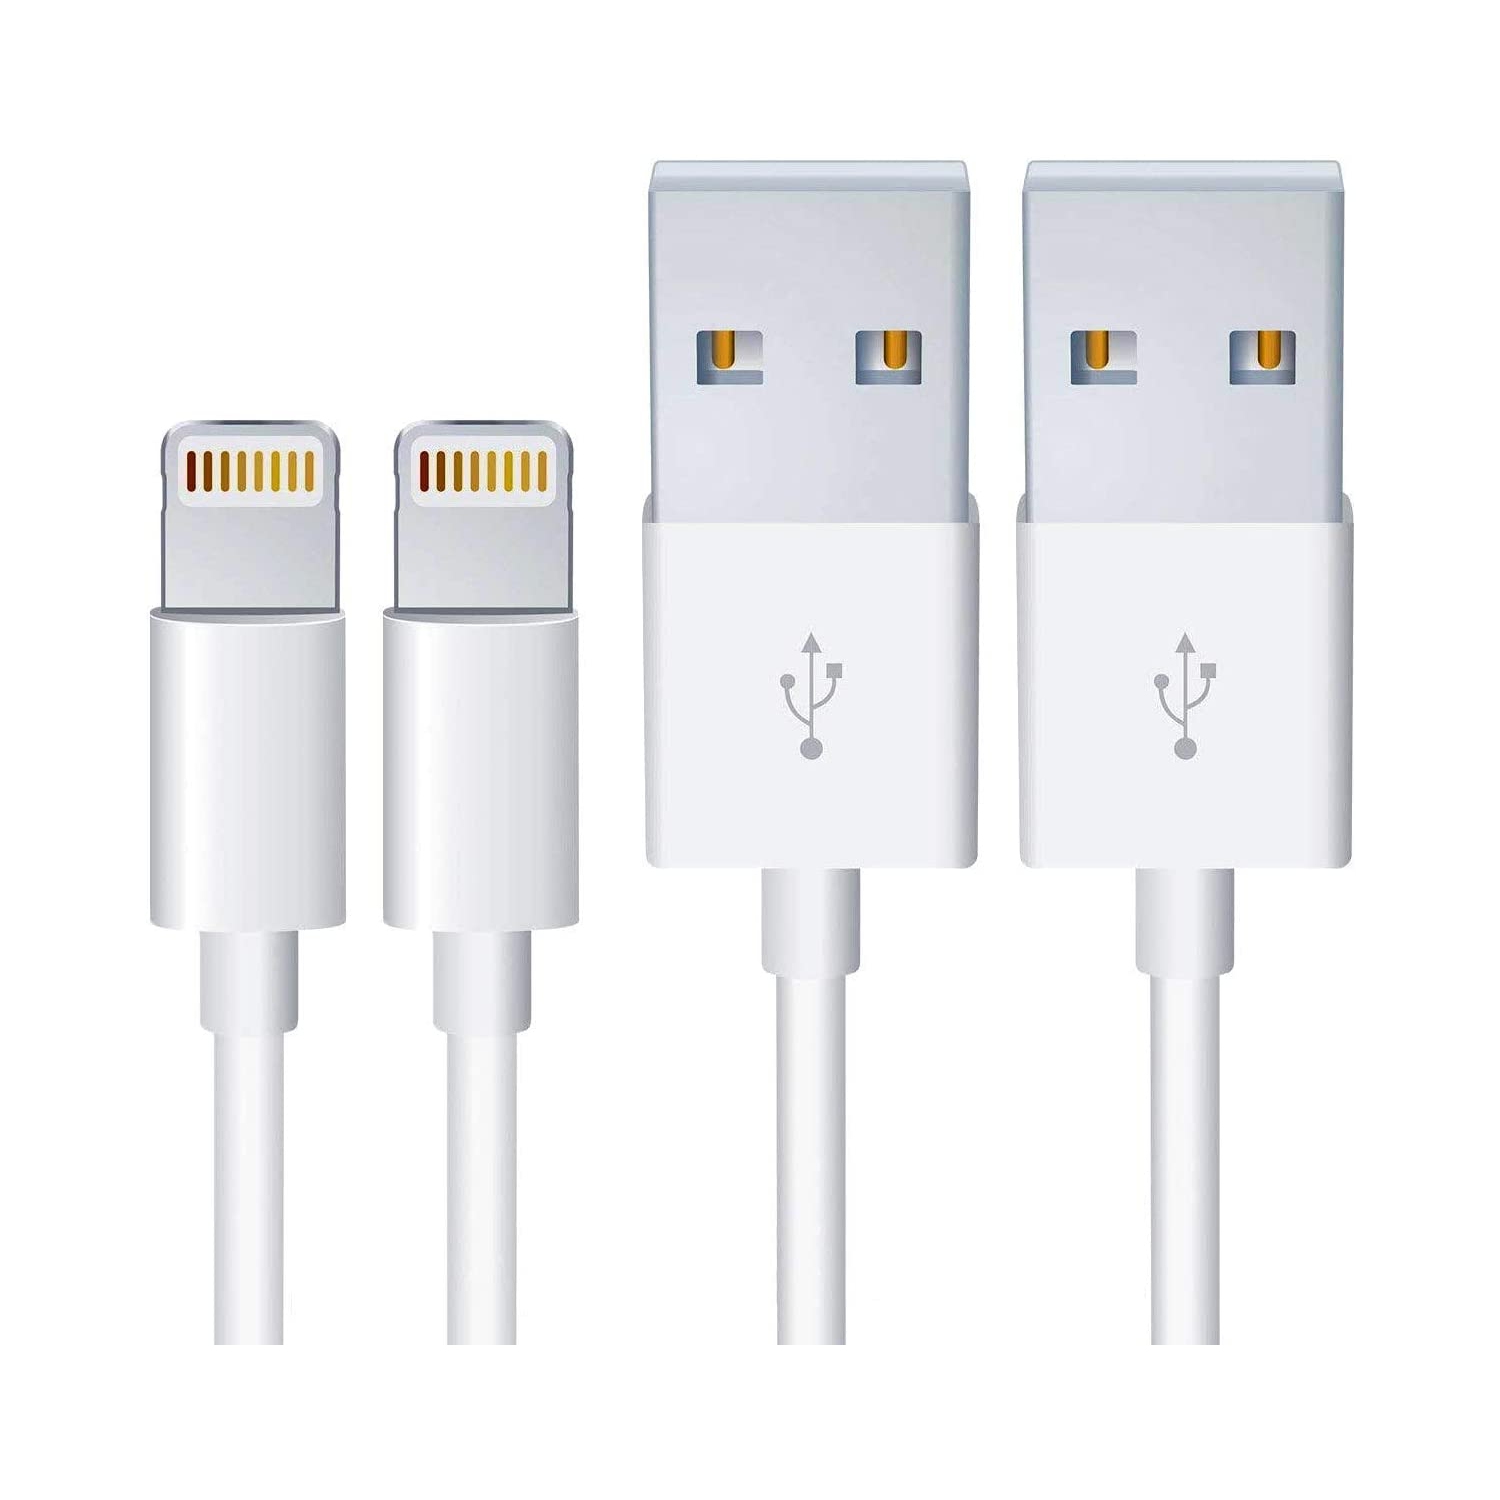 (CABLESHARK)[2 Packs] (3.3Ft / 1m) CERTIFIED COMPATIBLE With iPhone iPad Charging Charger Cord Lightning to USB Cable for Apple iPad iPhone 11/X/8/7/6/Plus/5s/5c/SE(FREE SHIPPING)